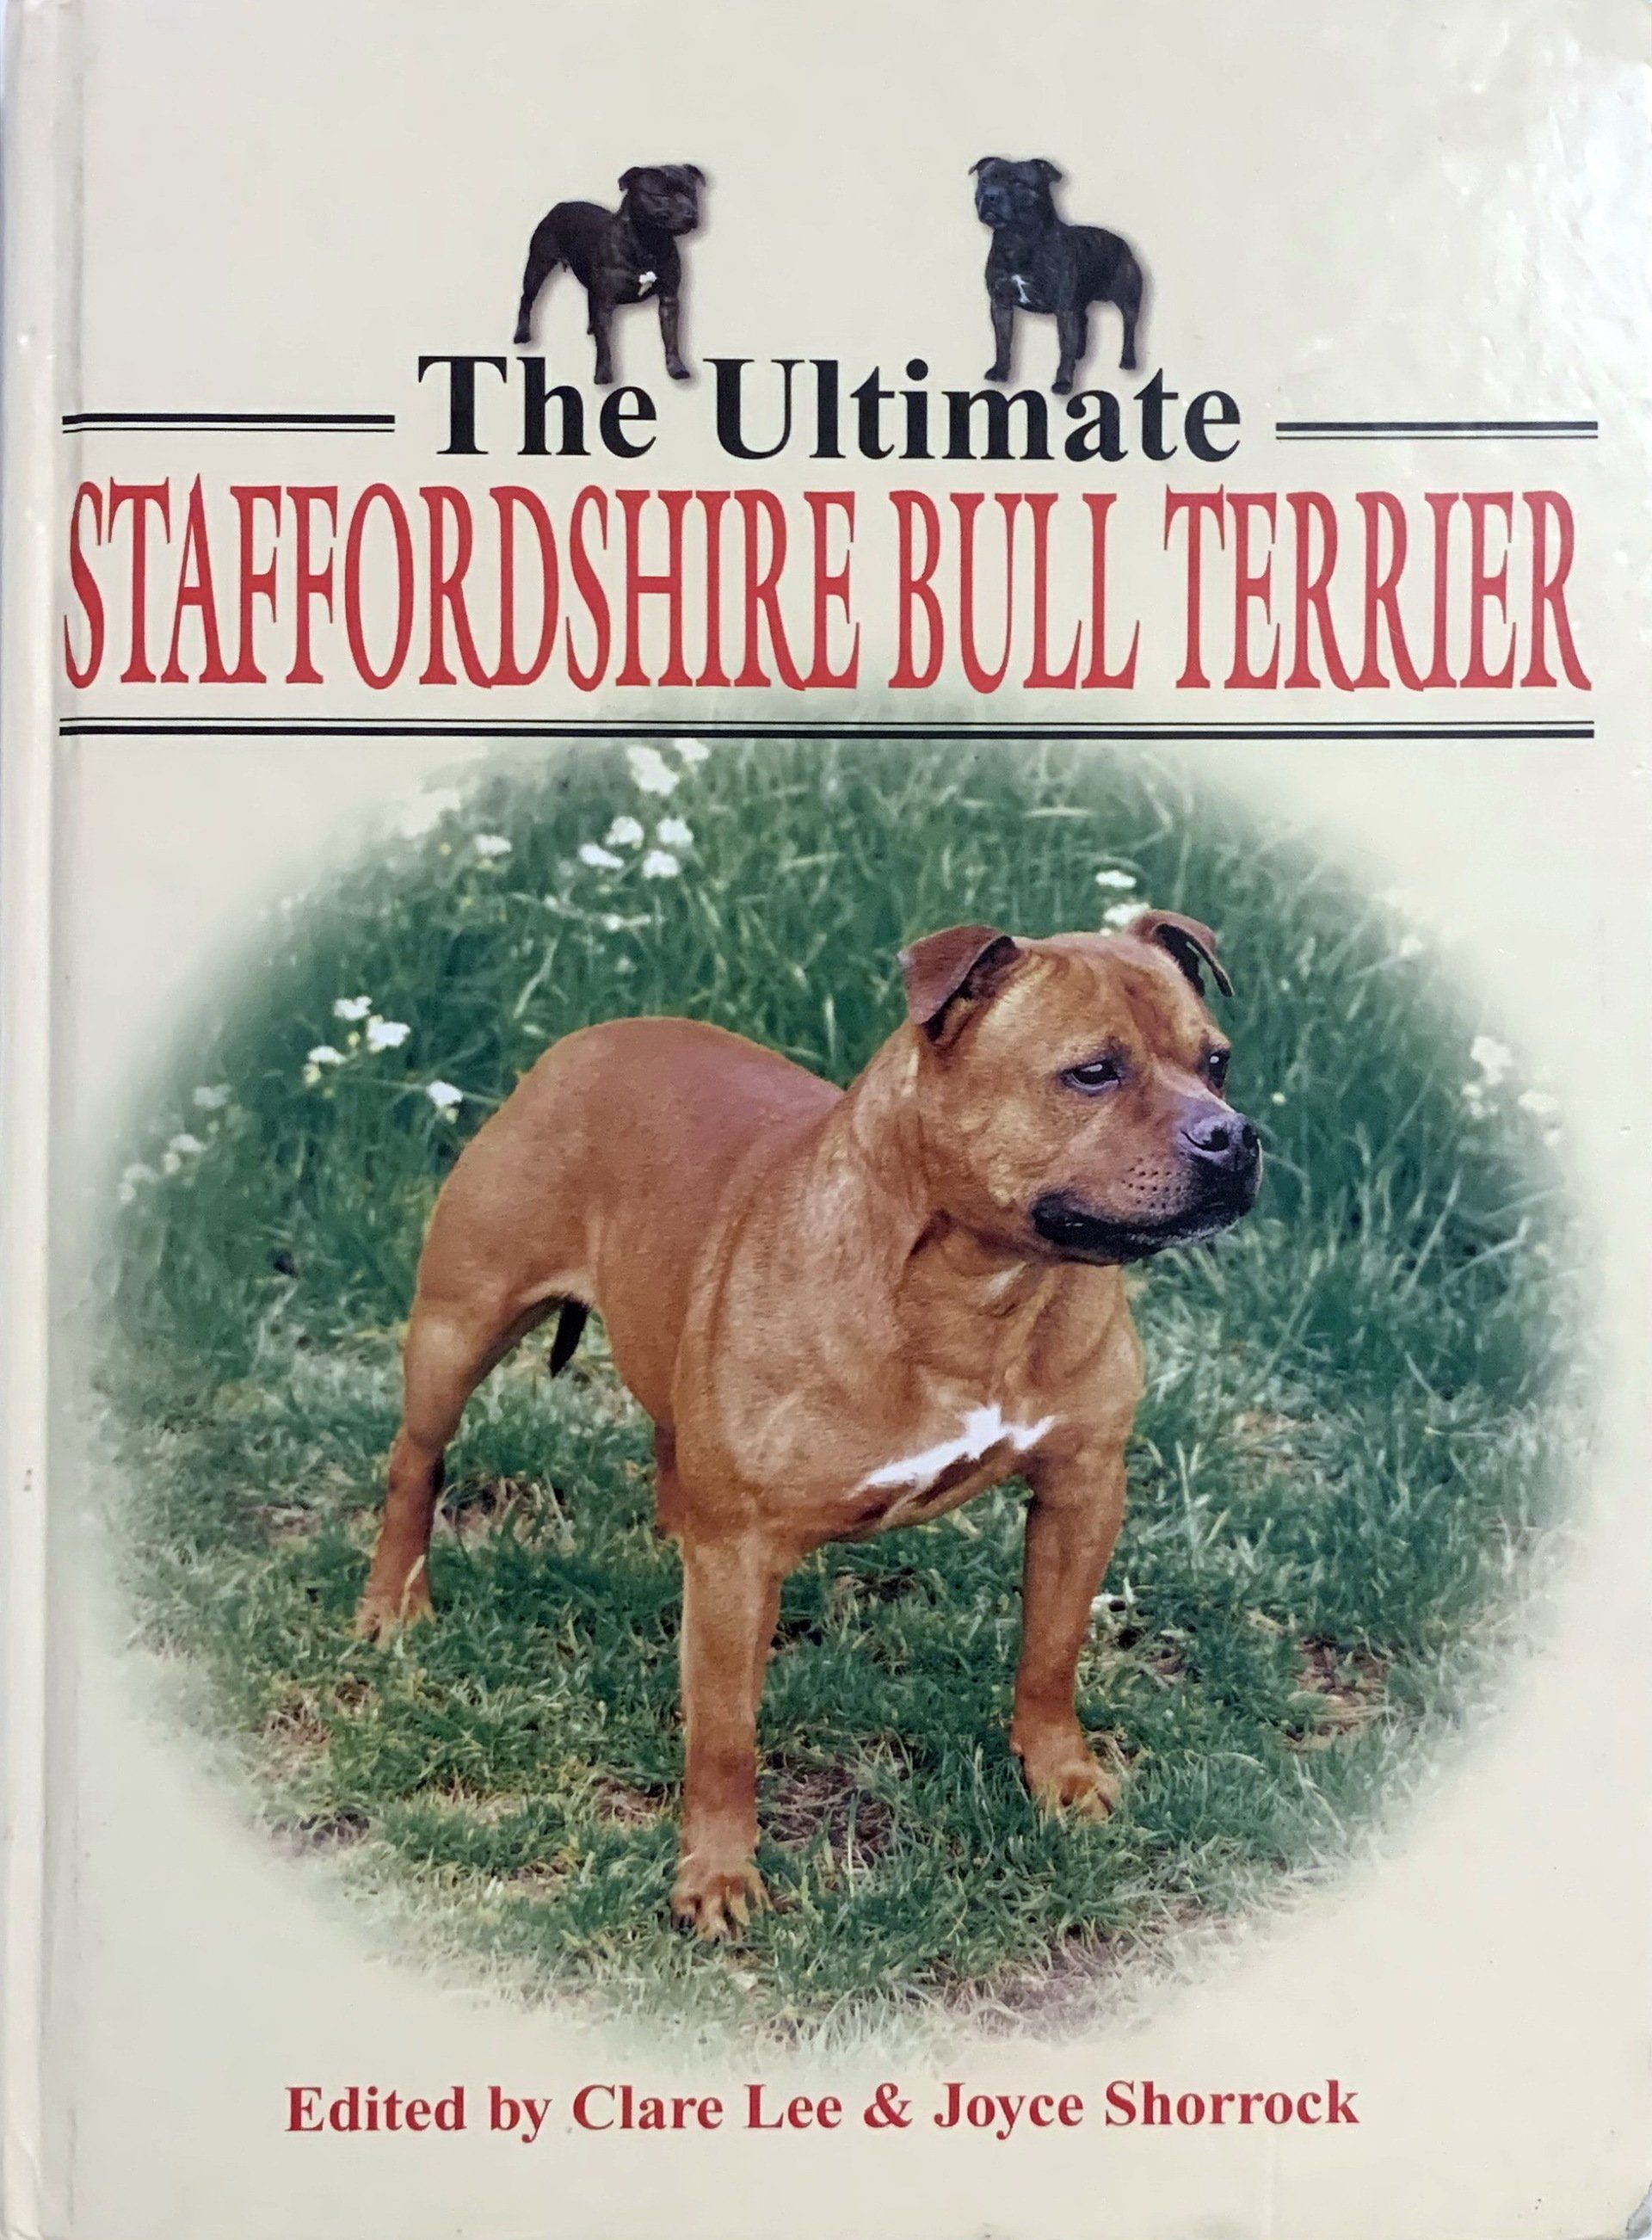 The Ultimate Staffordshire Bull Terrier by Clare Lee & Joyce Shorrock